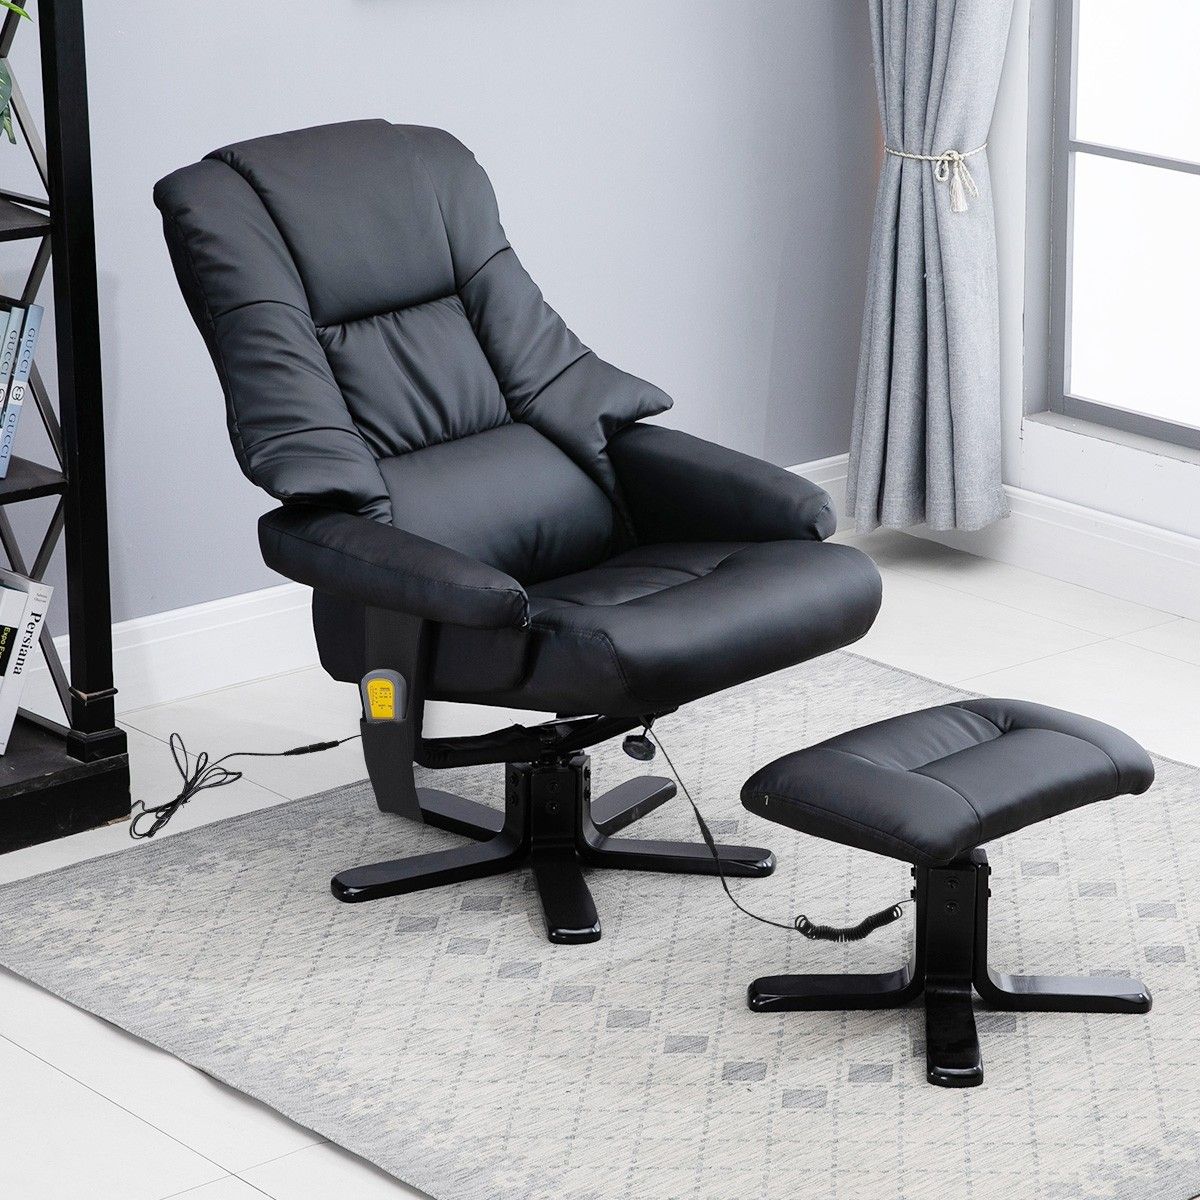 Full Body Massage Recliner Chair 8 Point Heated Office Chair Black